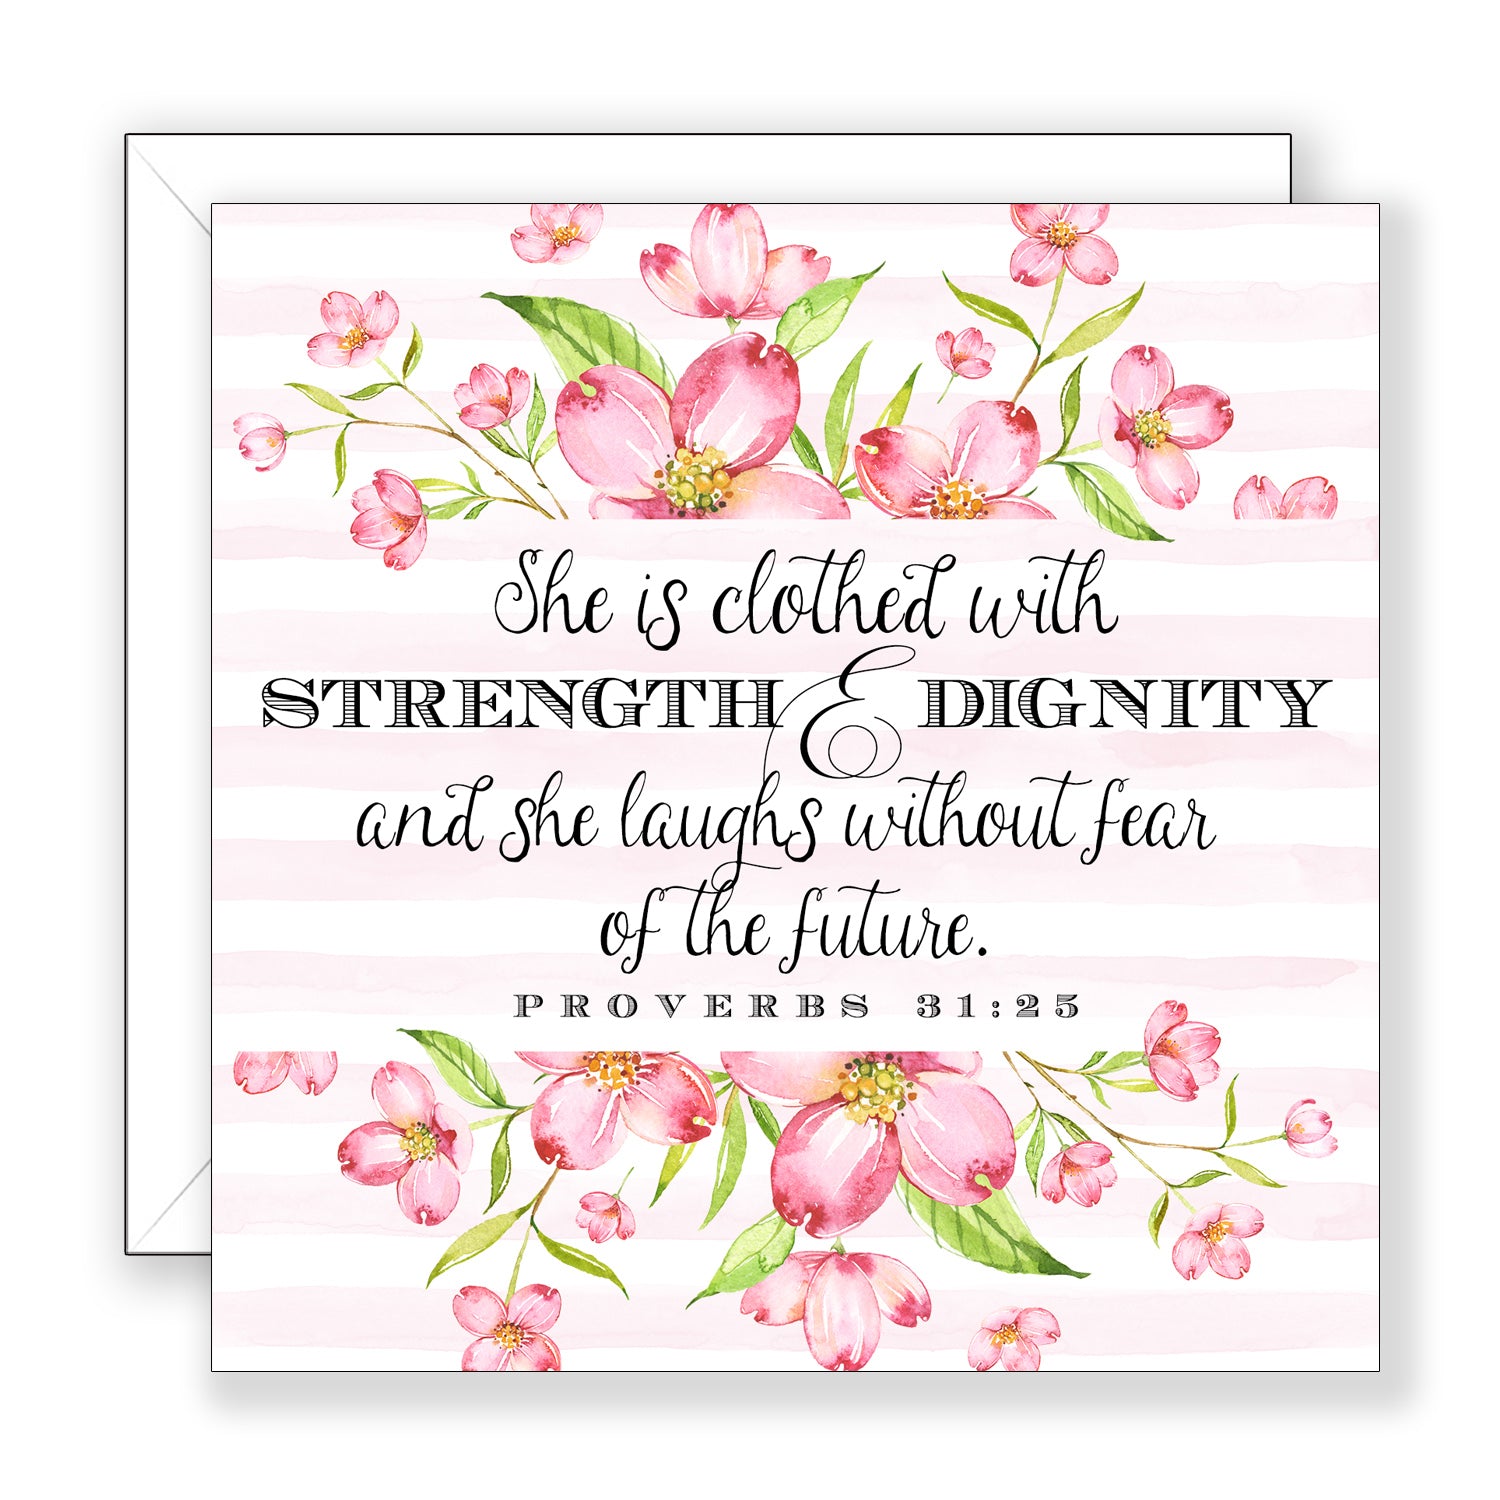 Strength and Dignity (Proverbs 31:25) - Encouragement Card